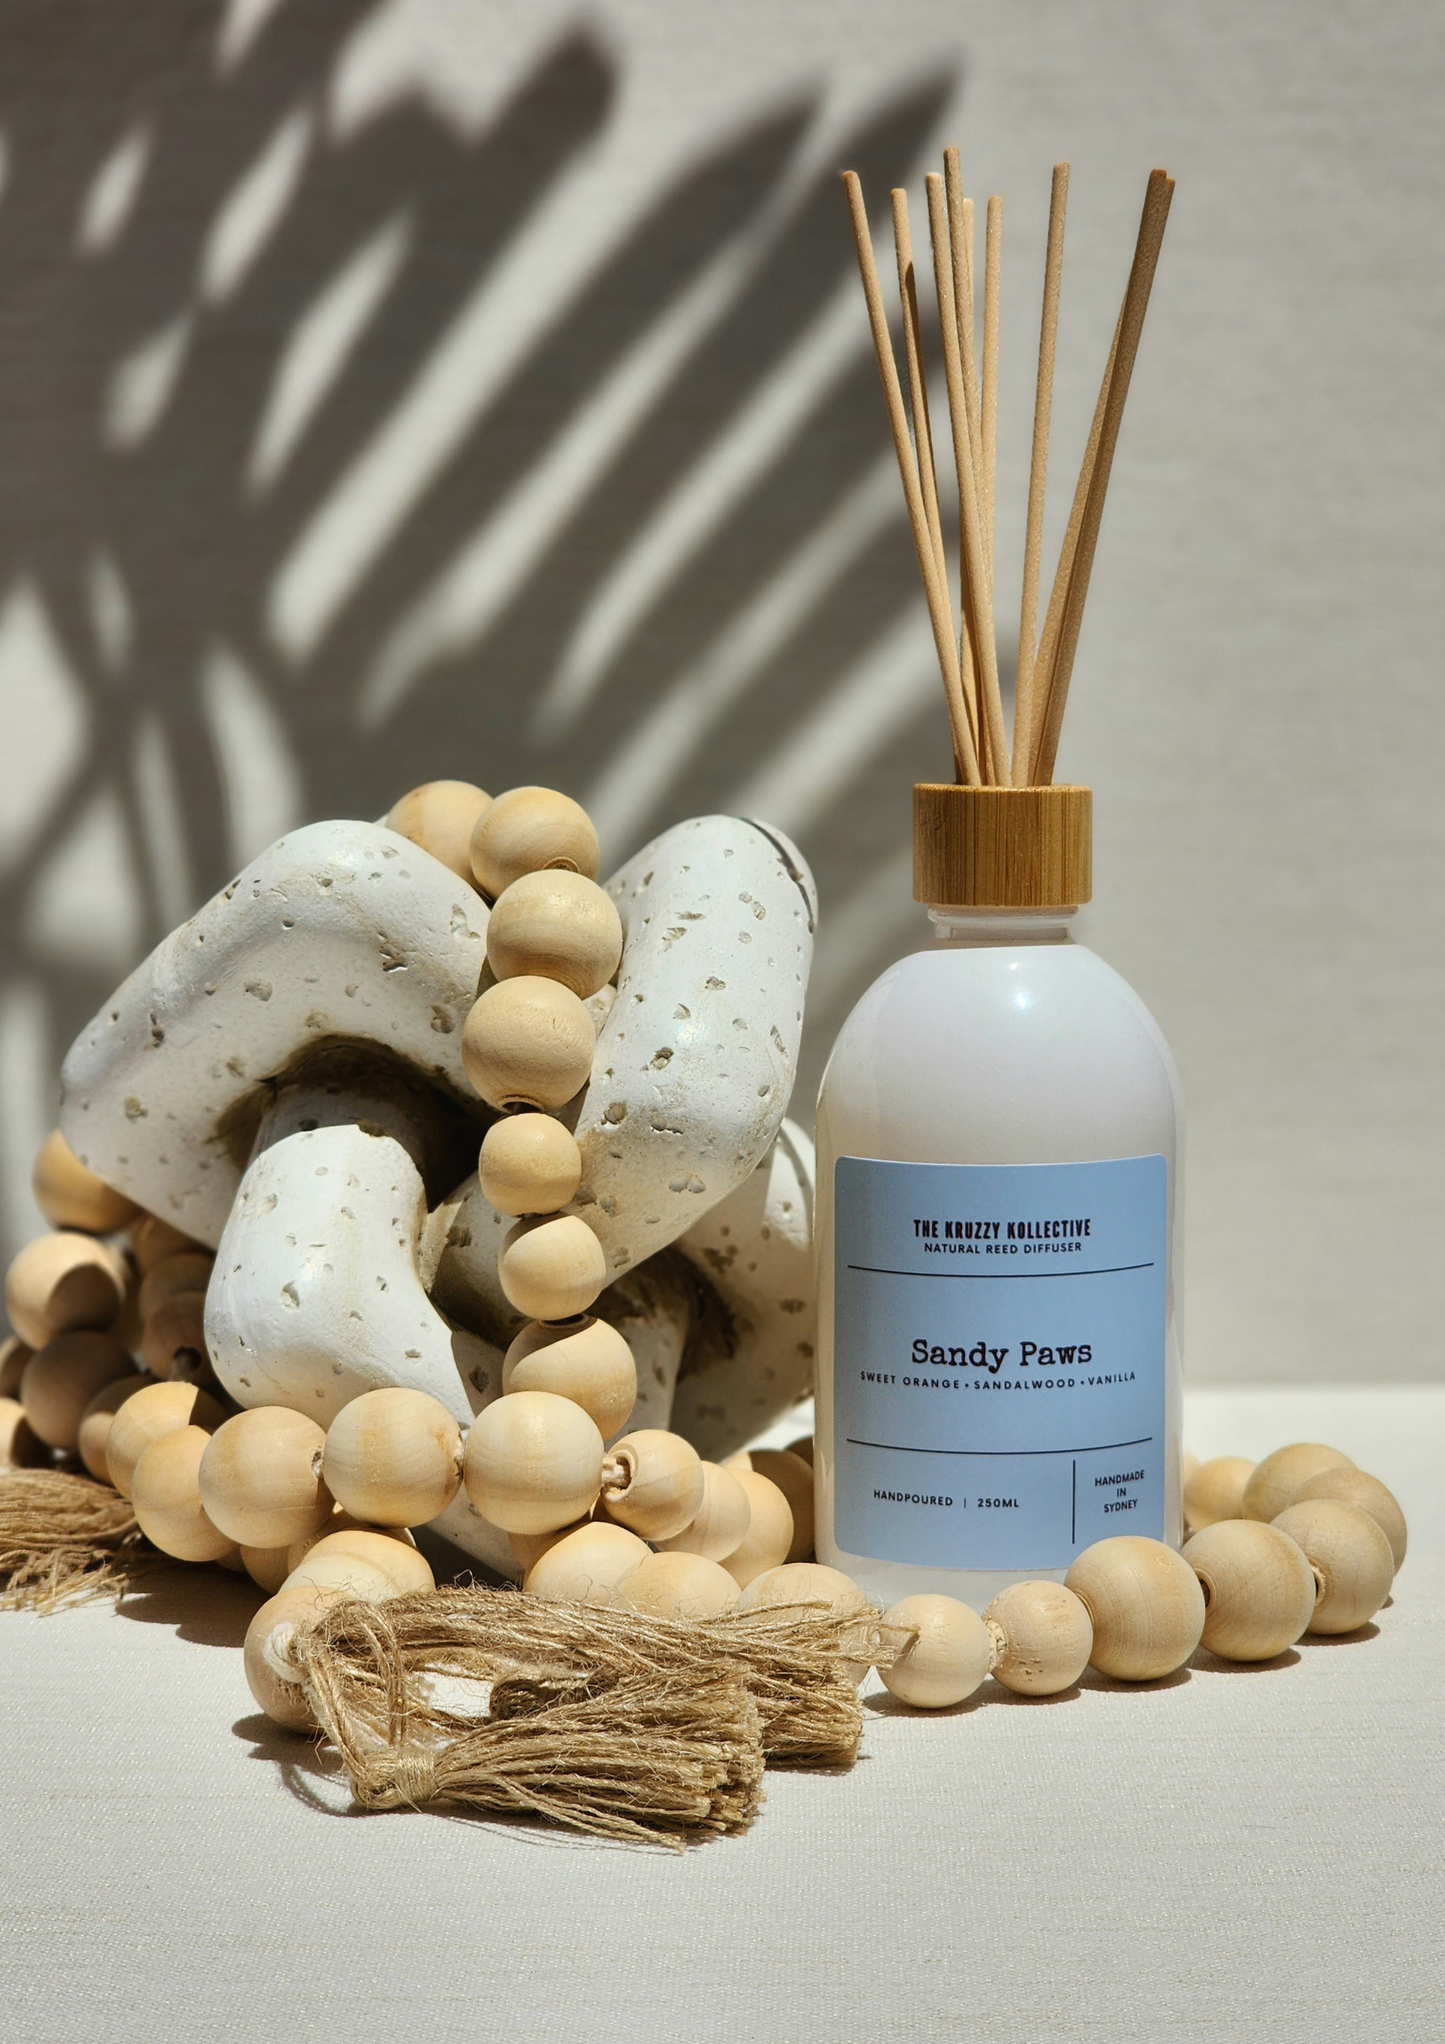 home fragrance natural reed diffuser best home scented fragrance sandalwood vanilla beach